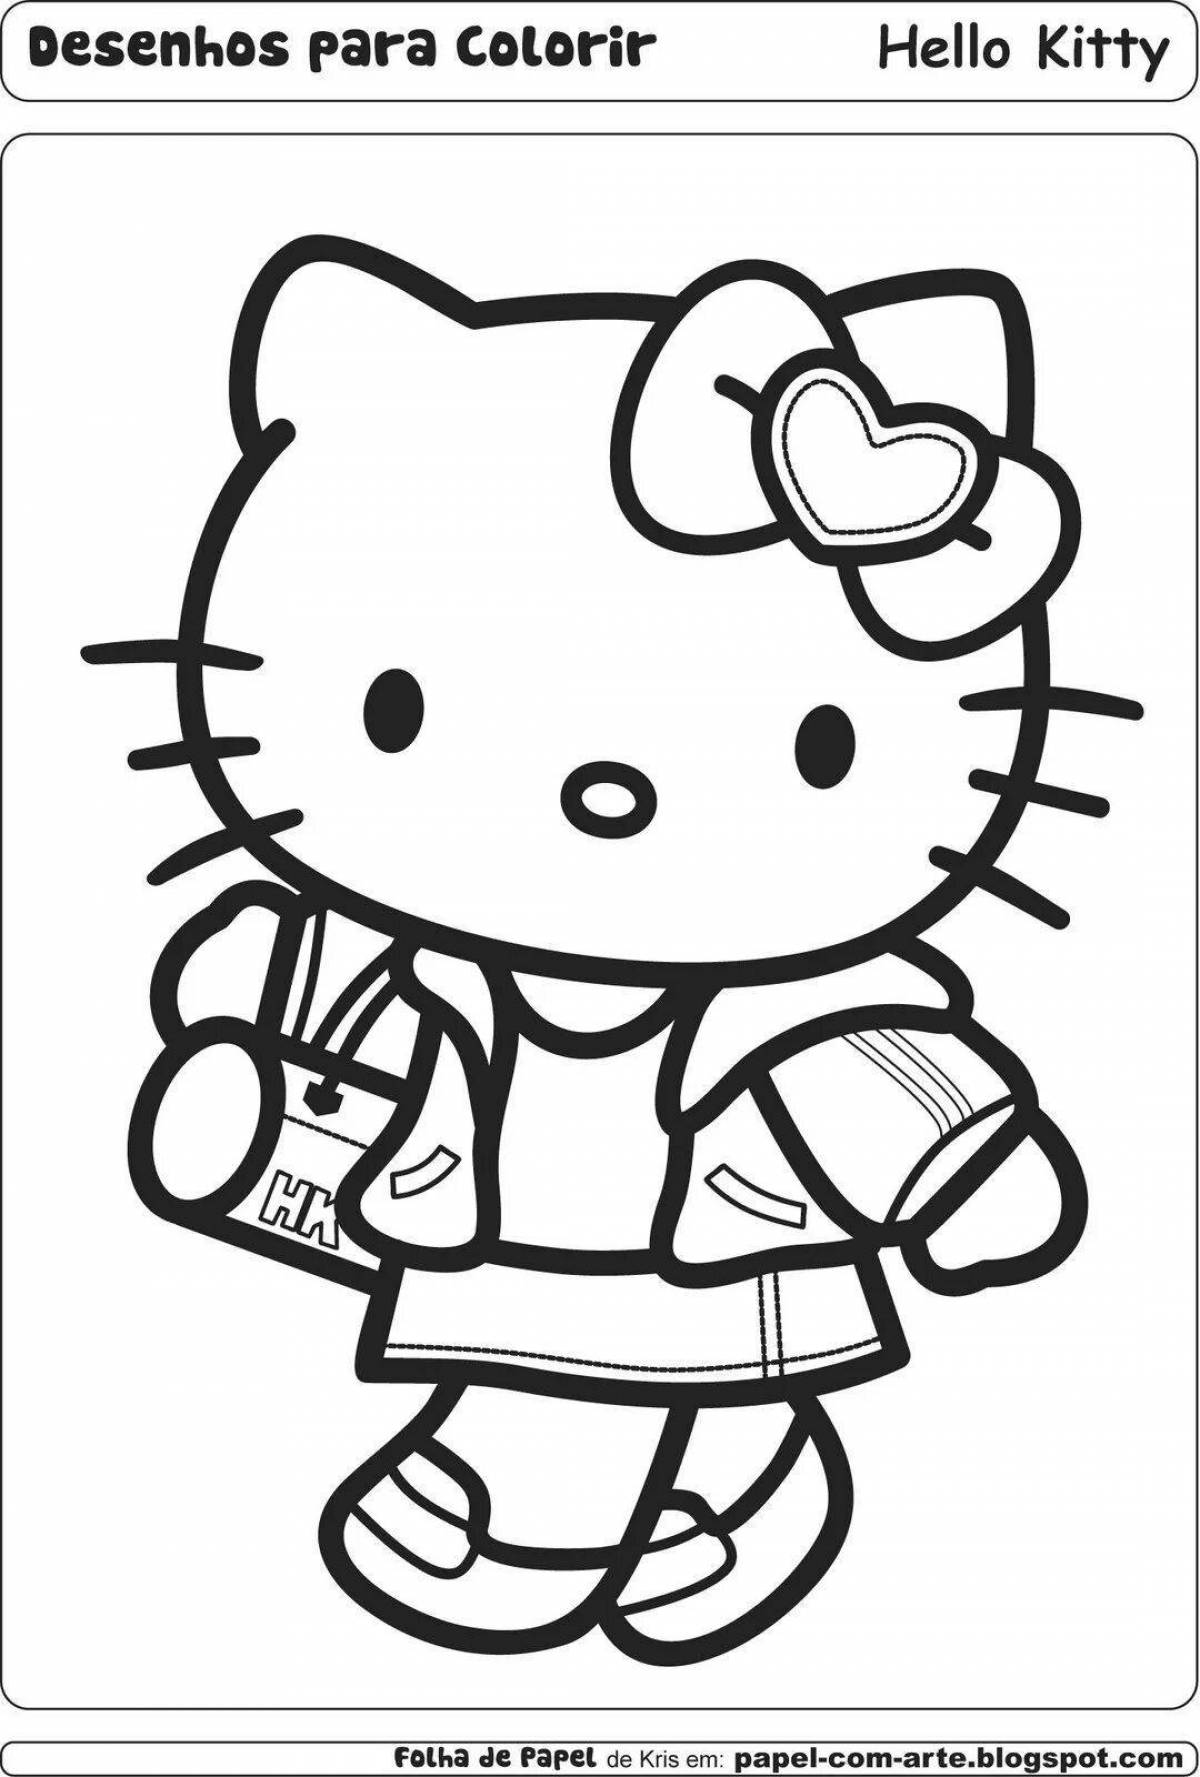 Coloring book admiring hello kitty characters